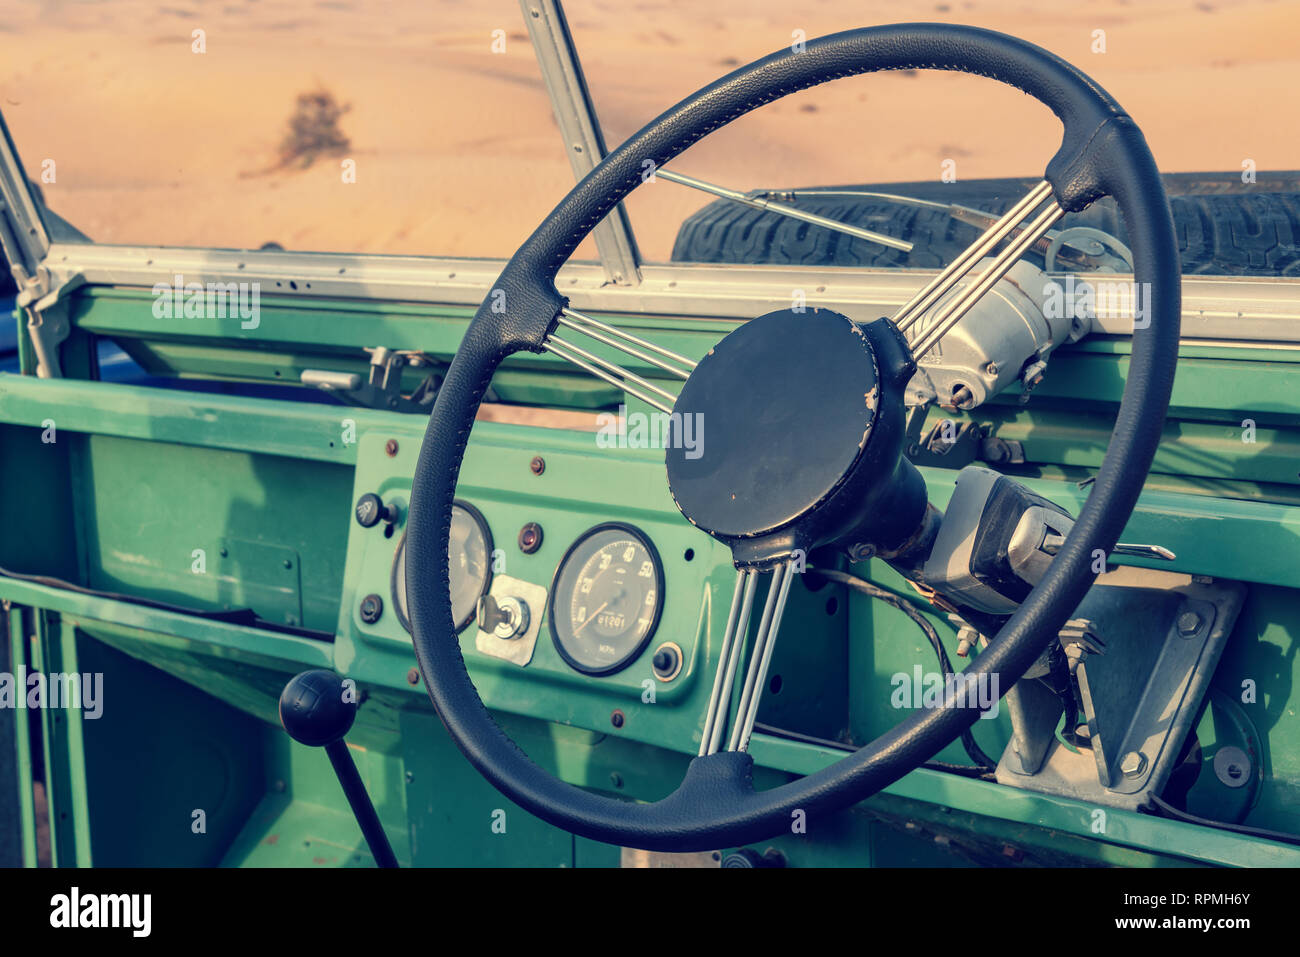 Inside of a vintage open top green 4x4 SUV Stock Photo